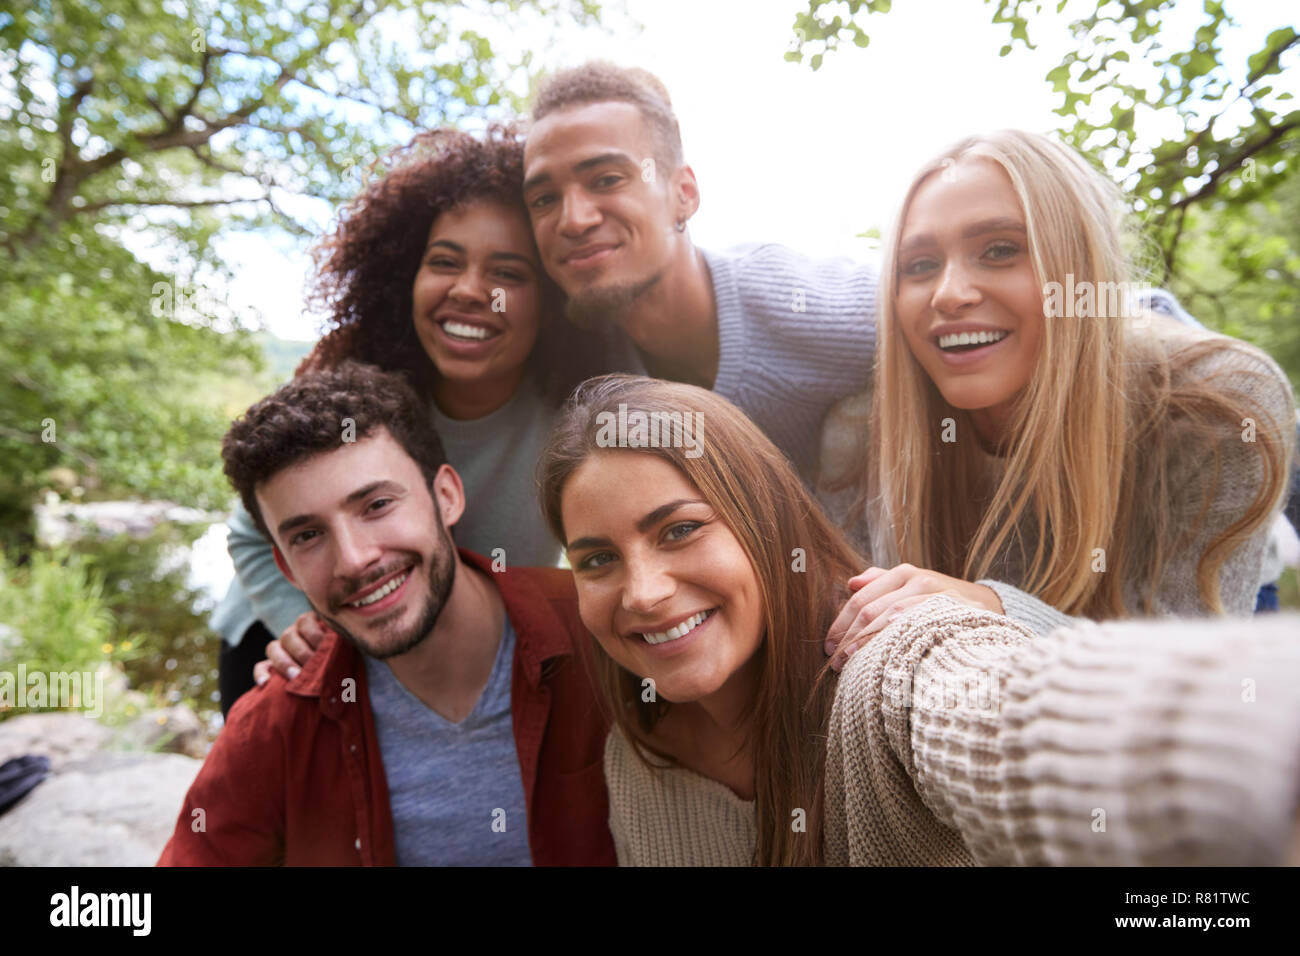 three happy friends are being funny and playful and posing for a group  photo. Photoshoot with family members Stock Photo - Alamy